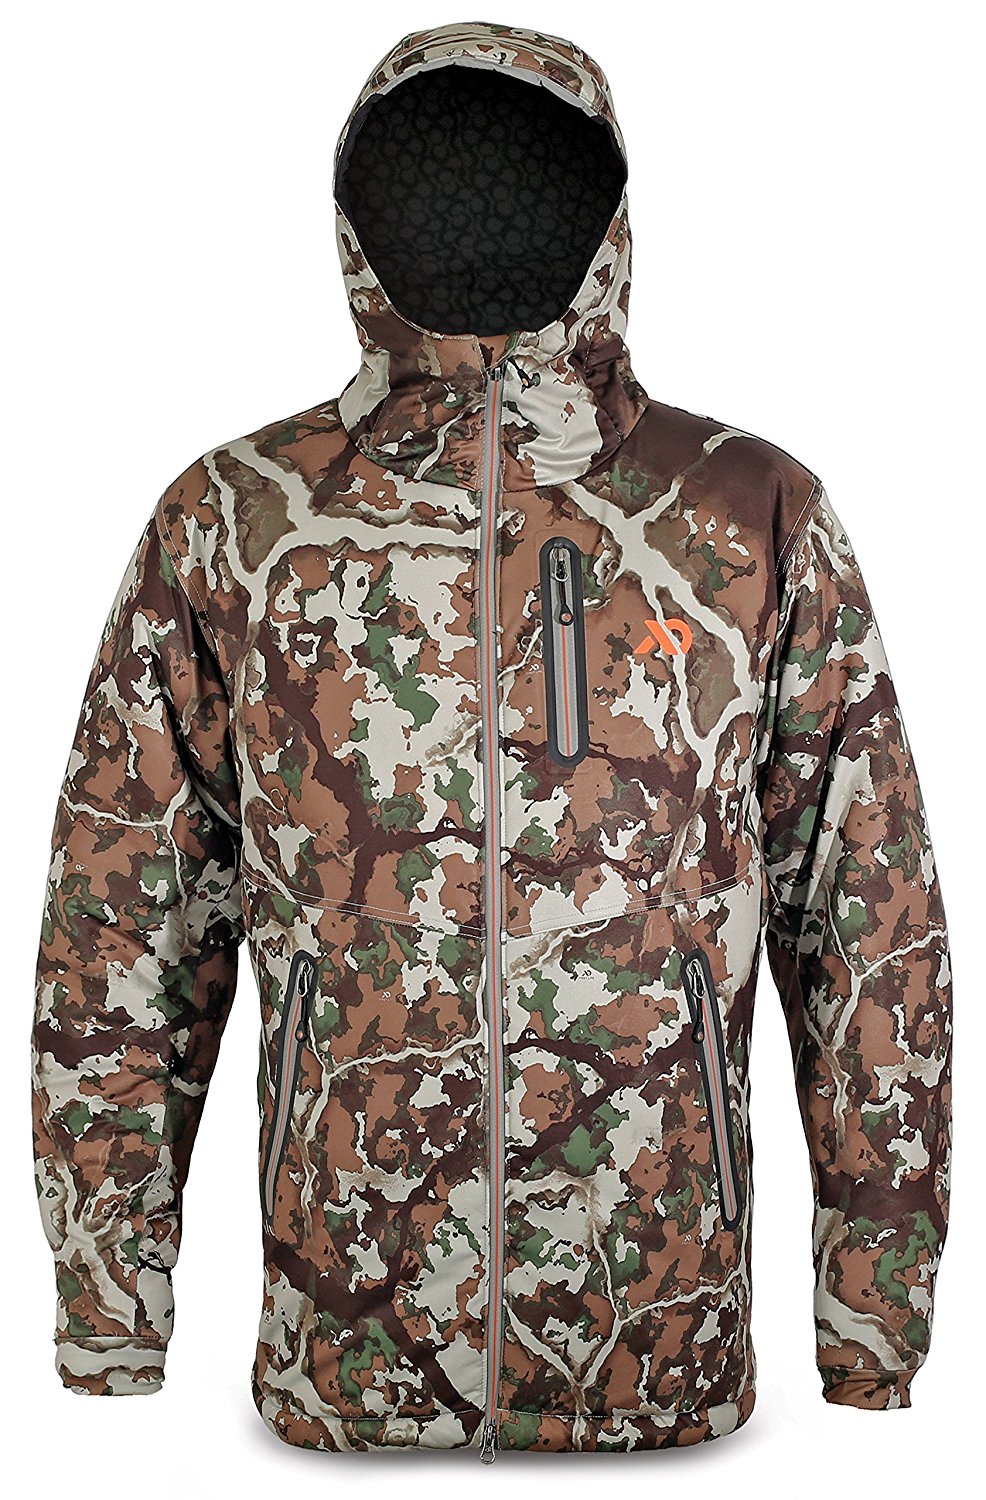 A Guide for Choosing the Best Hunting Camo Good Game Hunting